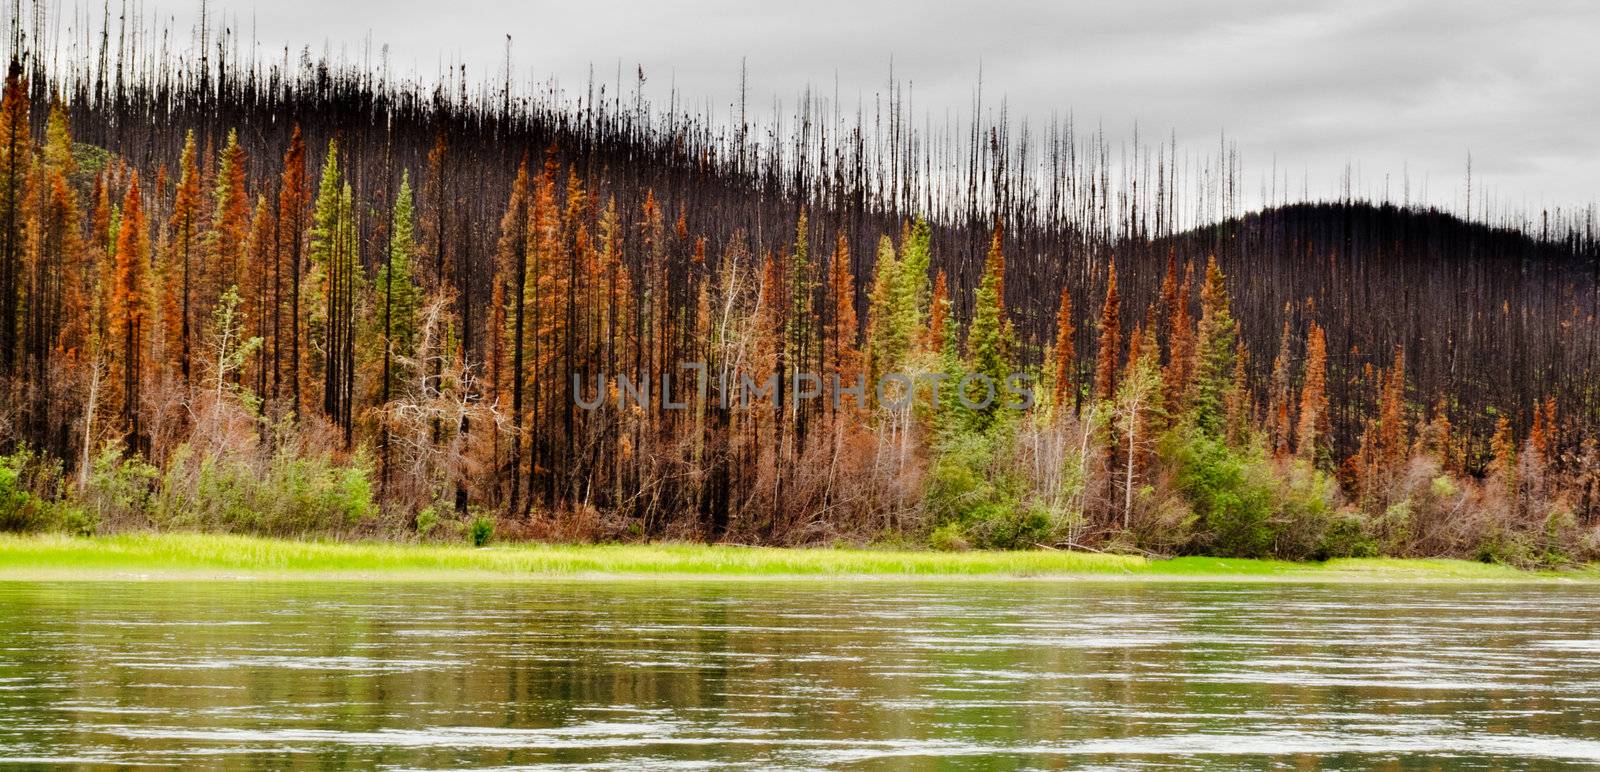 Boreal forest at Yukon River destroyed by fire by PiLens